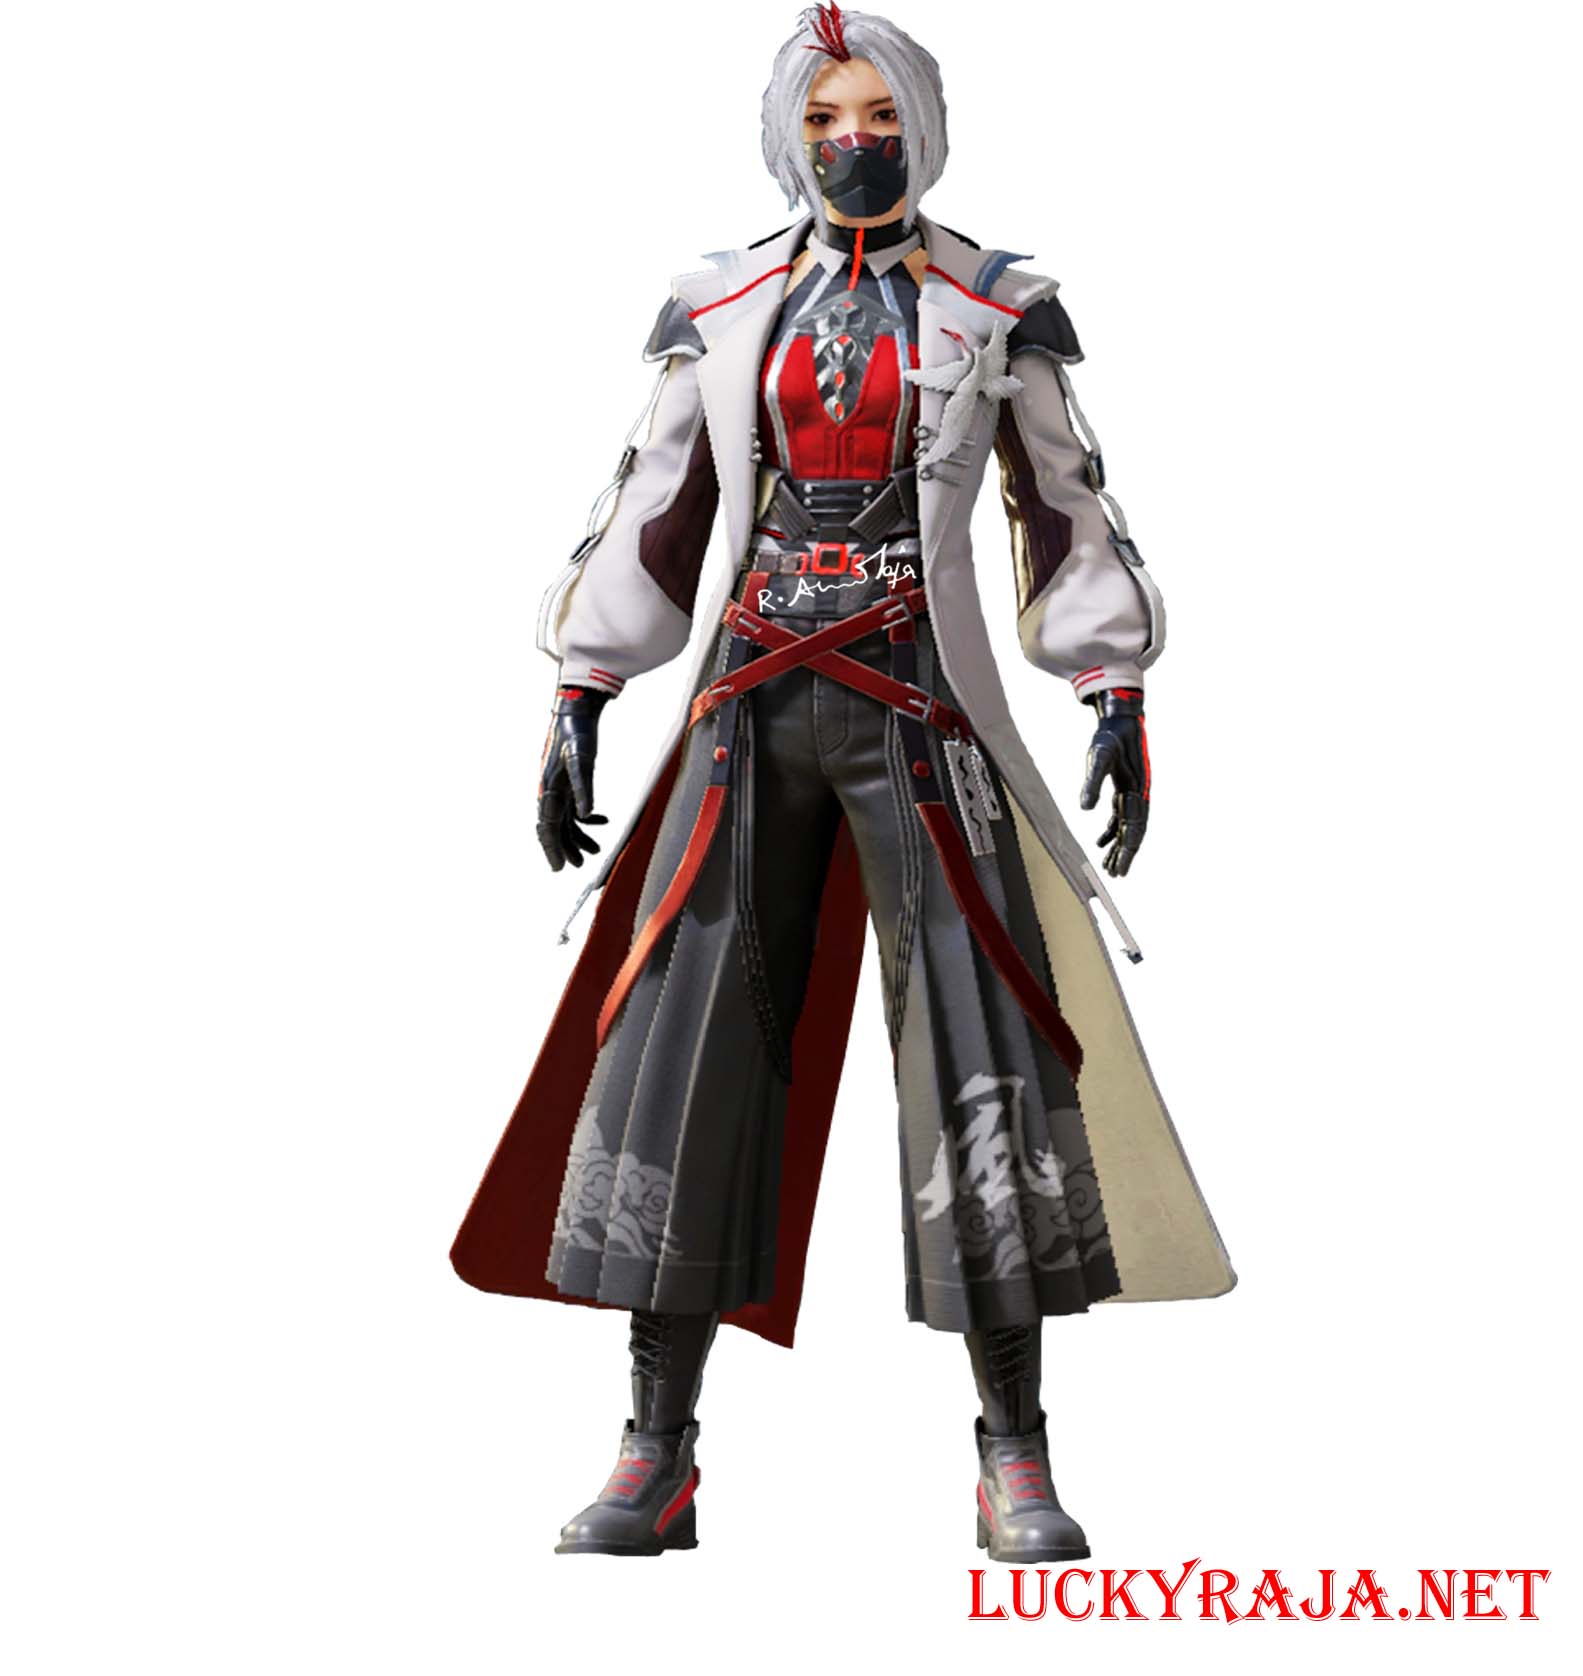 Ascendant Agent ,Ascendant Agent images,Ascendant Agent pubg mobile,Ascendant Agent outfit,pubg mobile outfits,animation,cartoon images